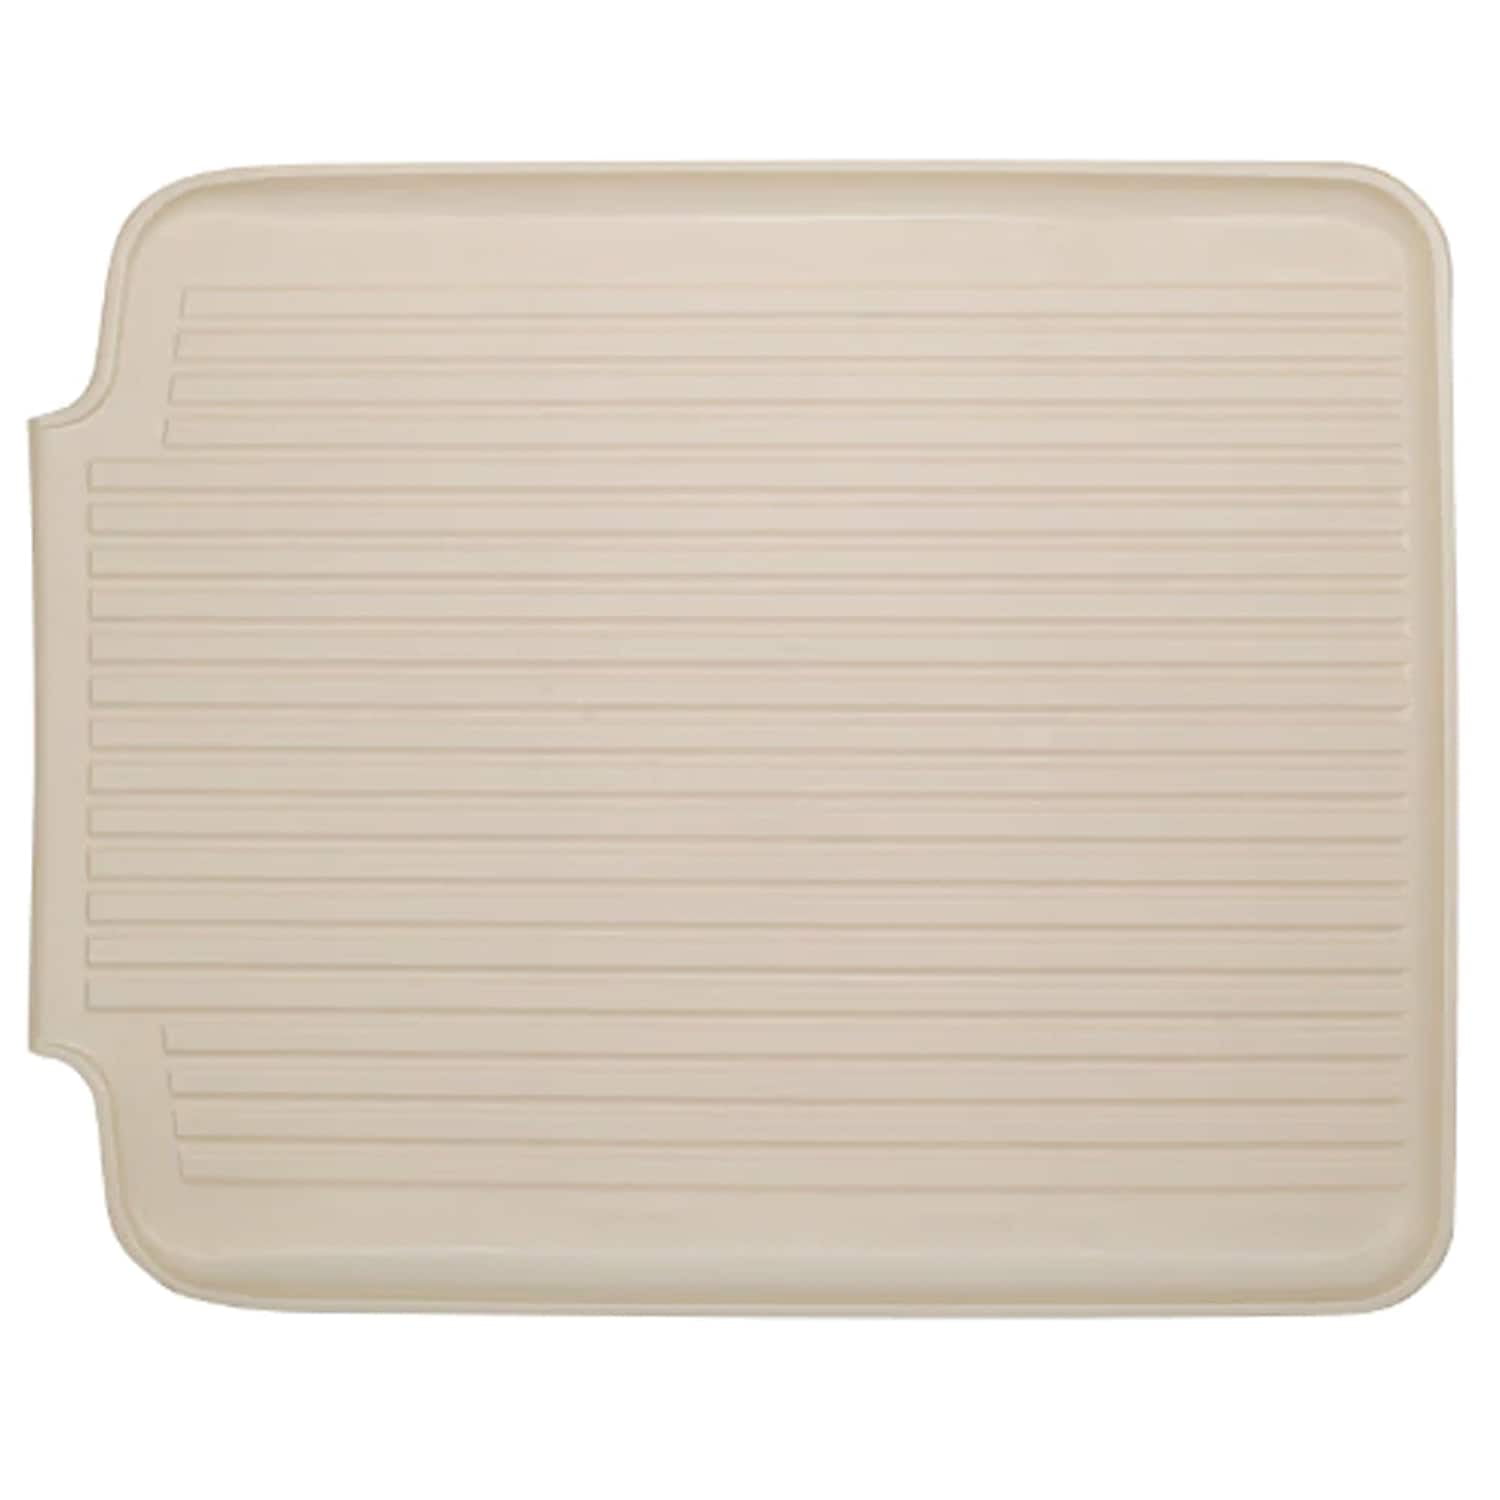 Better Houseware 1480.9 Dish Drain Board (Frosted)